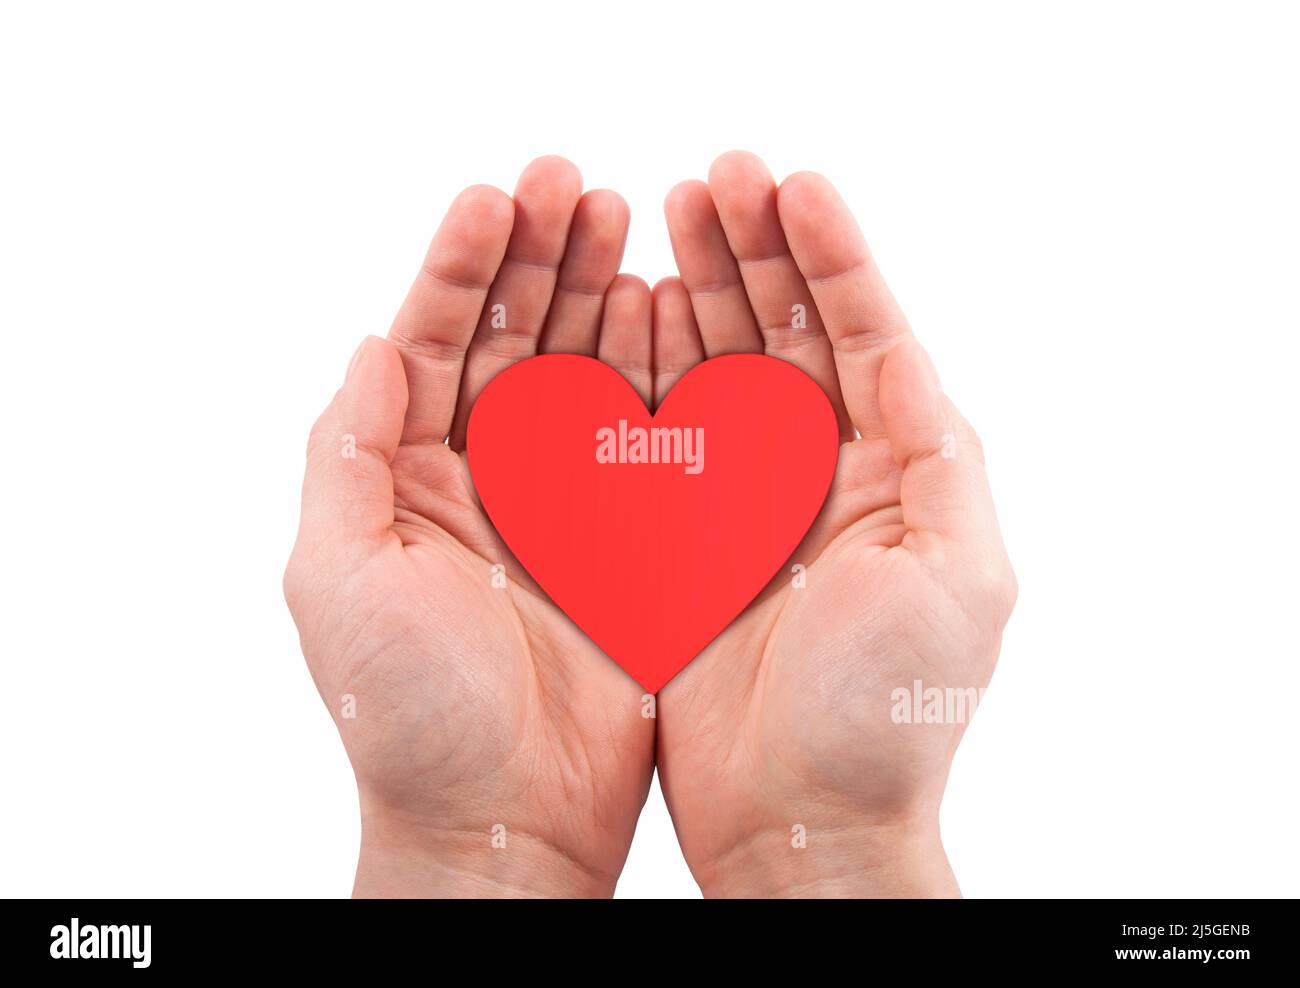 Paper red heart cutout in hands isolated on white background with clipping path. Health insurance or love concept Stock Photo